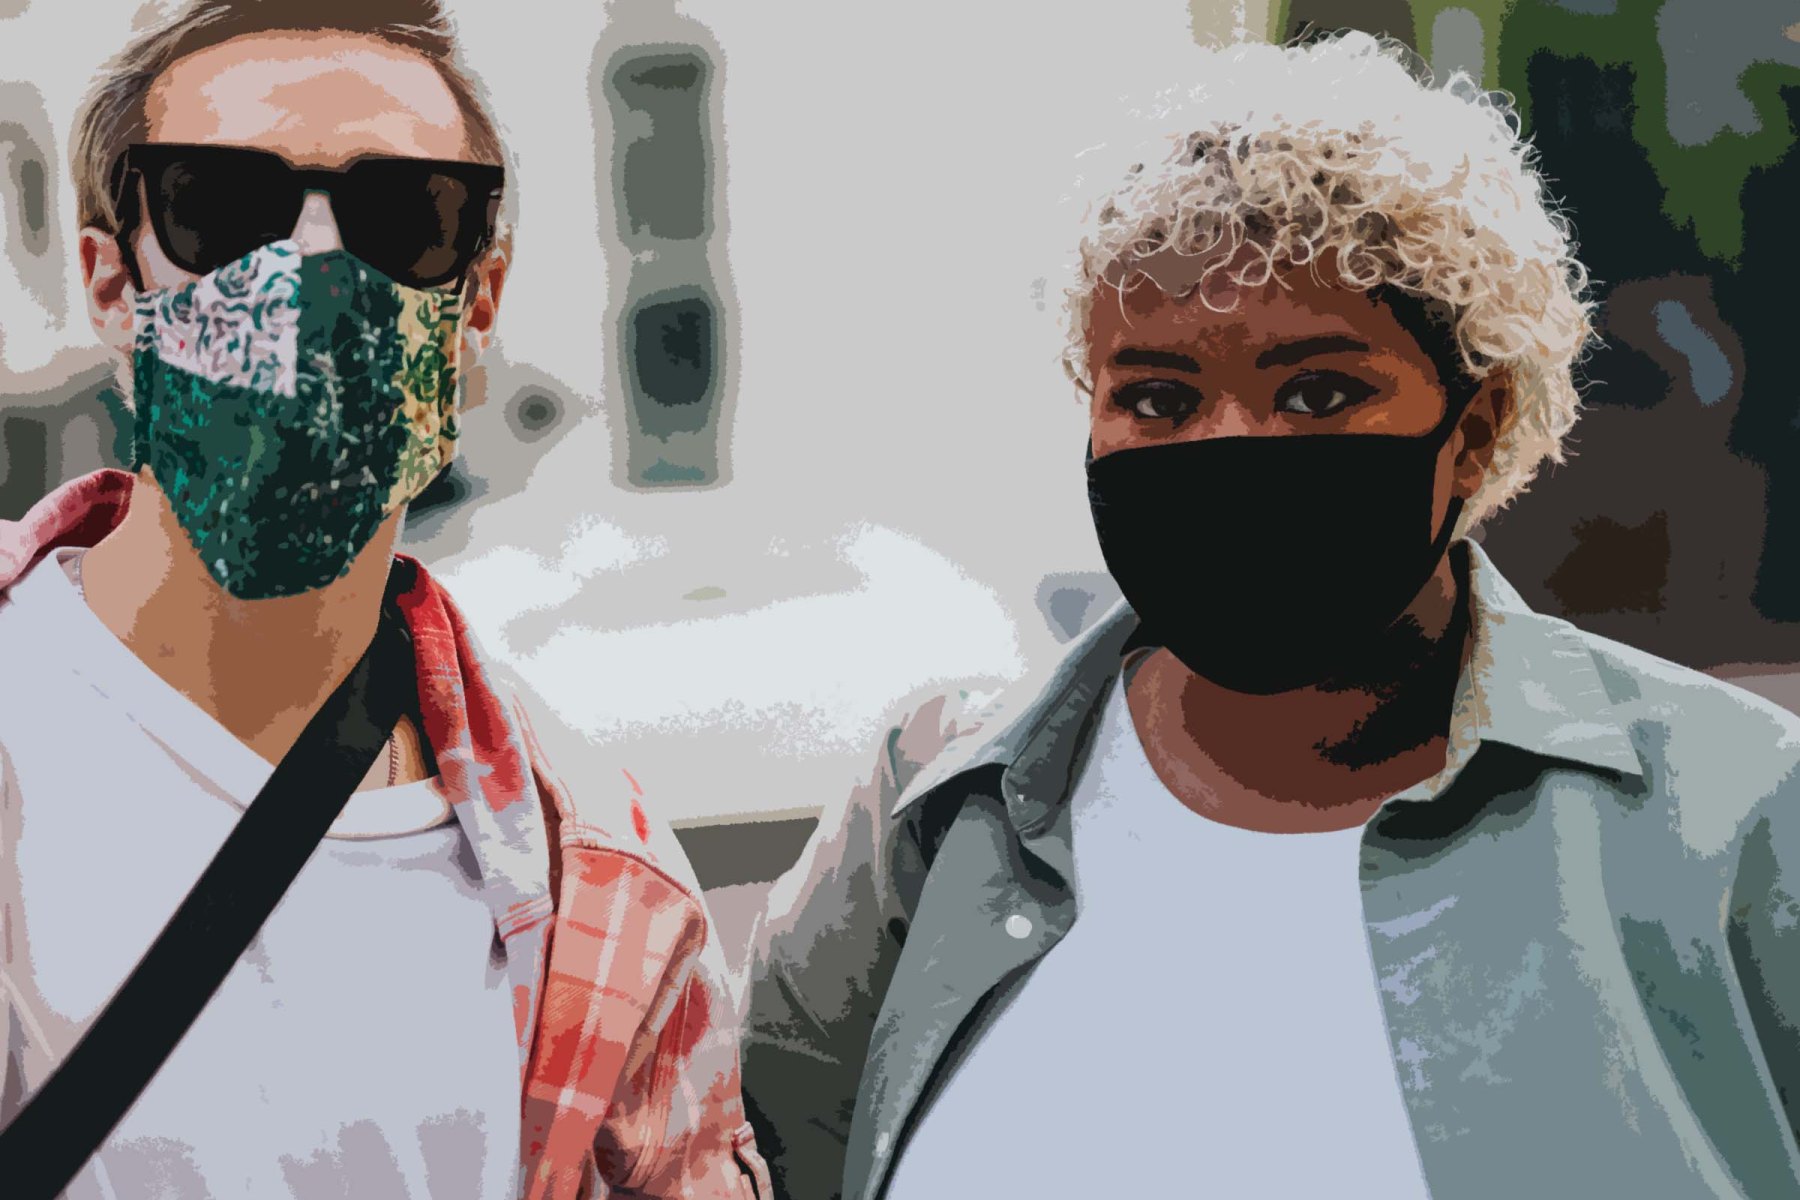 Two young people stand together wearing COVID-19 face masks. On the left is a White man and on the right is a Black woman